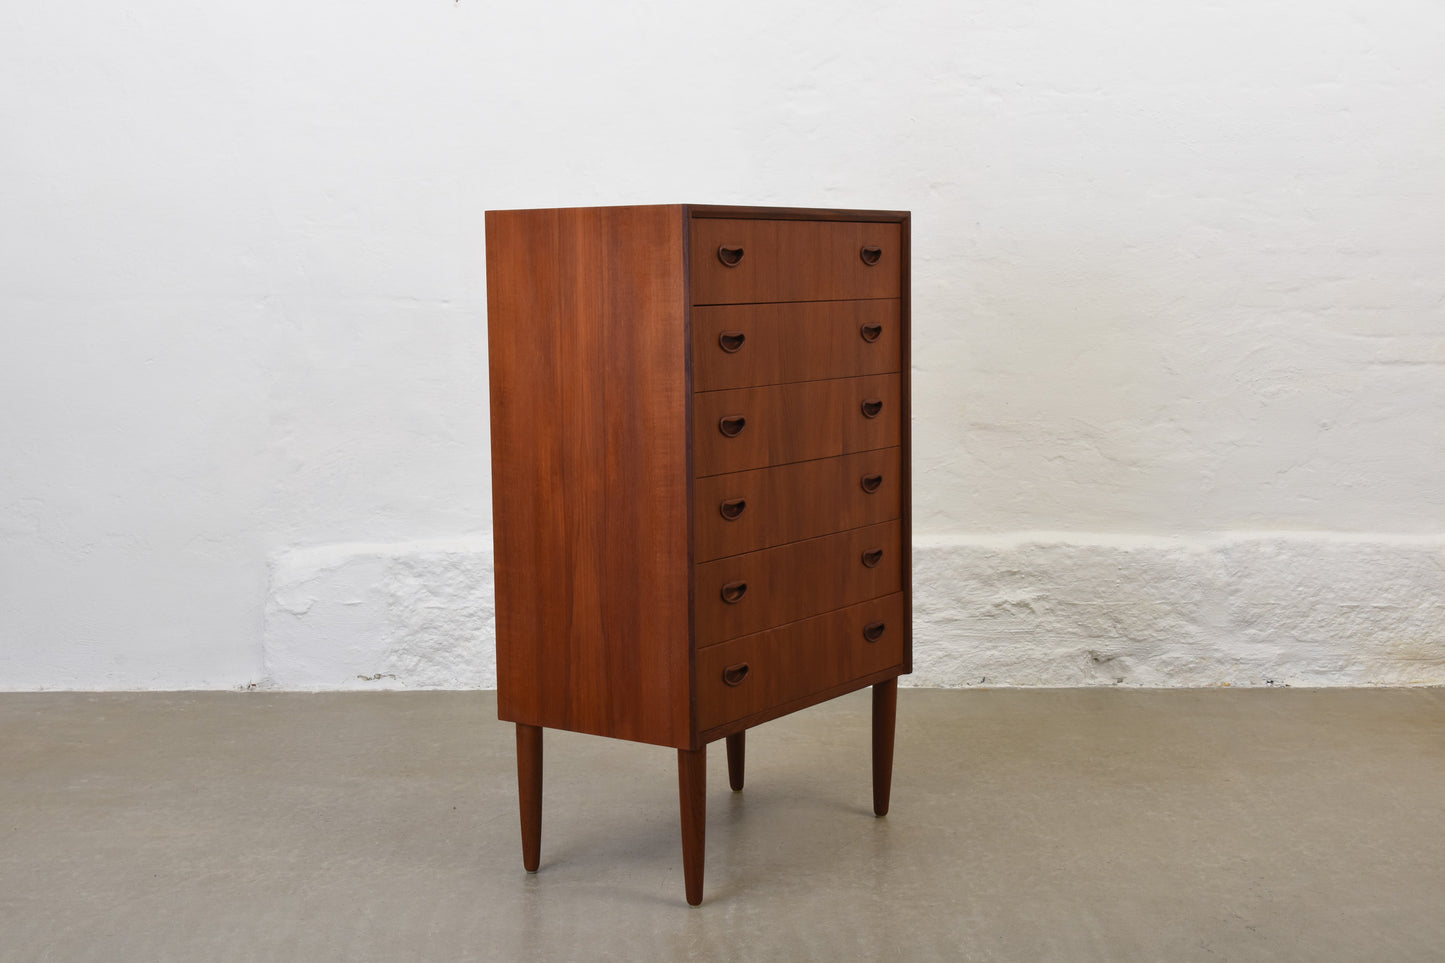 1960s teak chest with inset handles no. 1